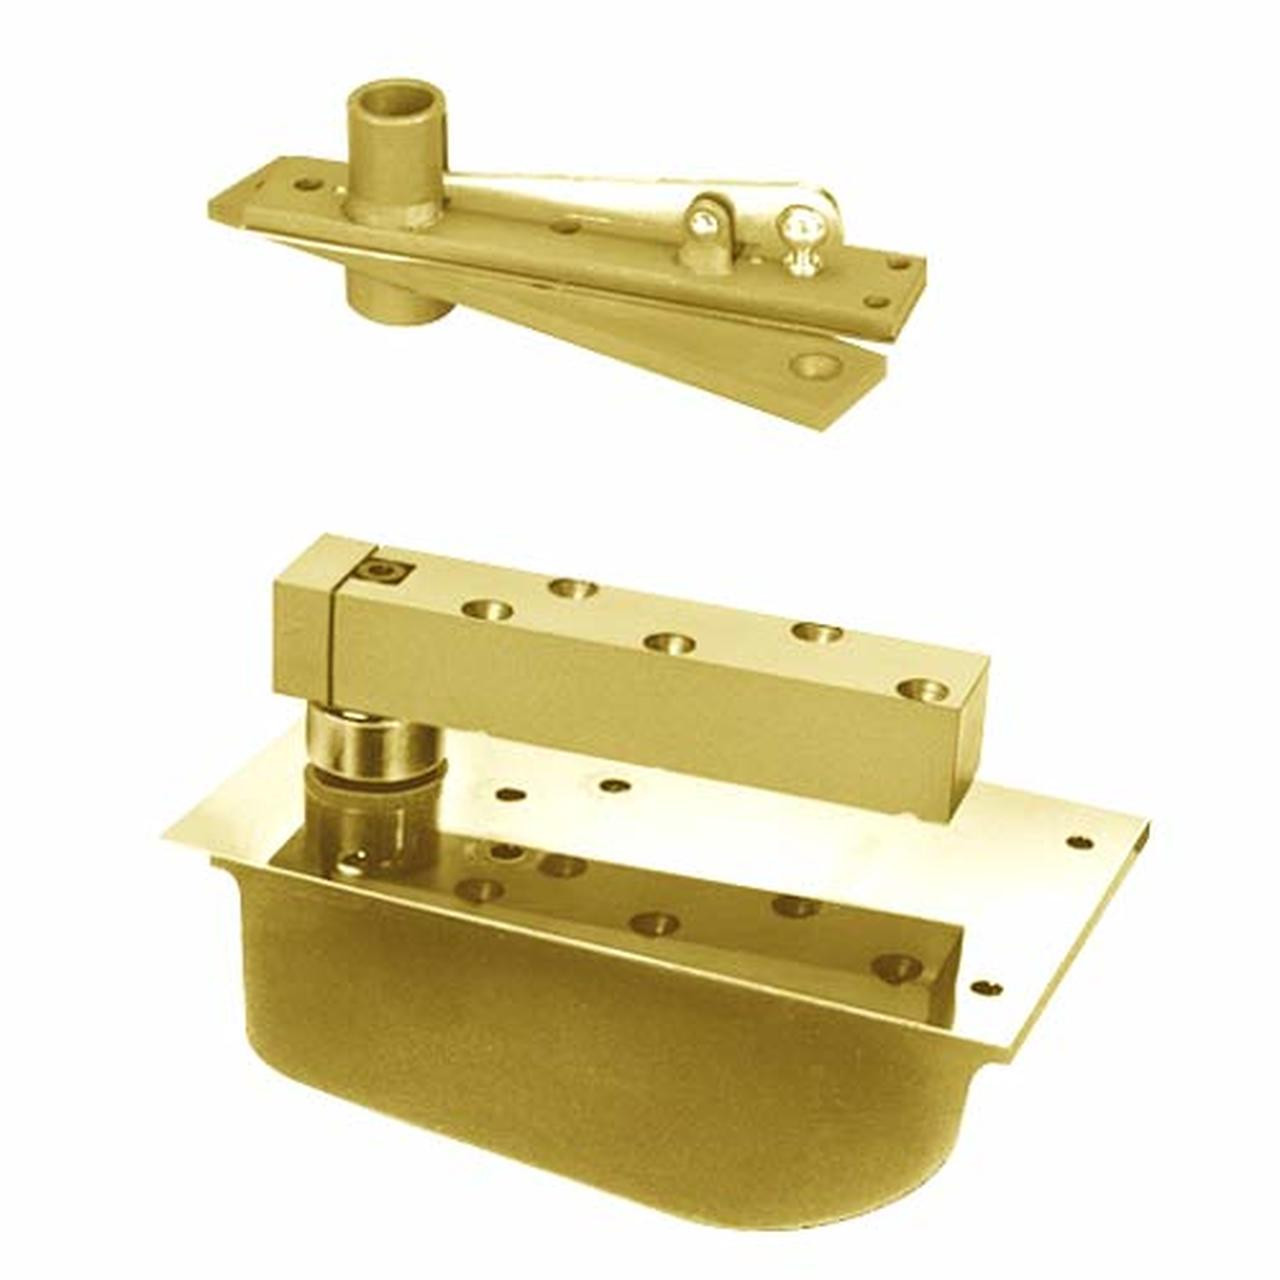 H28-90S-LCC-LH-605 Rixson 28 Series Heavy Duty Single Acting Center Hung Floor Closer in Bright Brass Finish